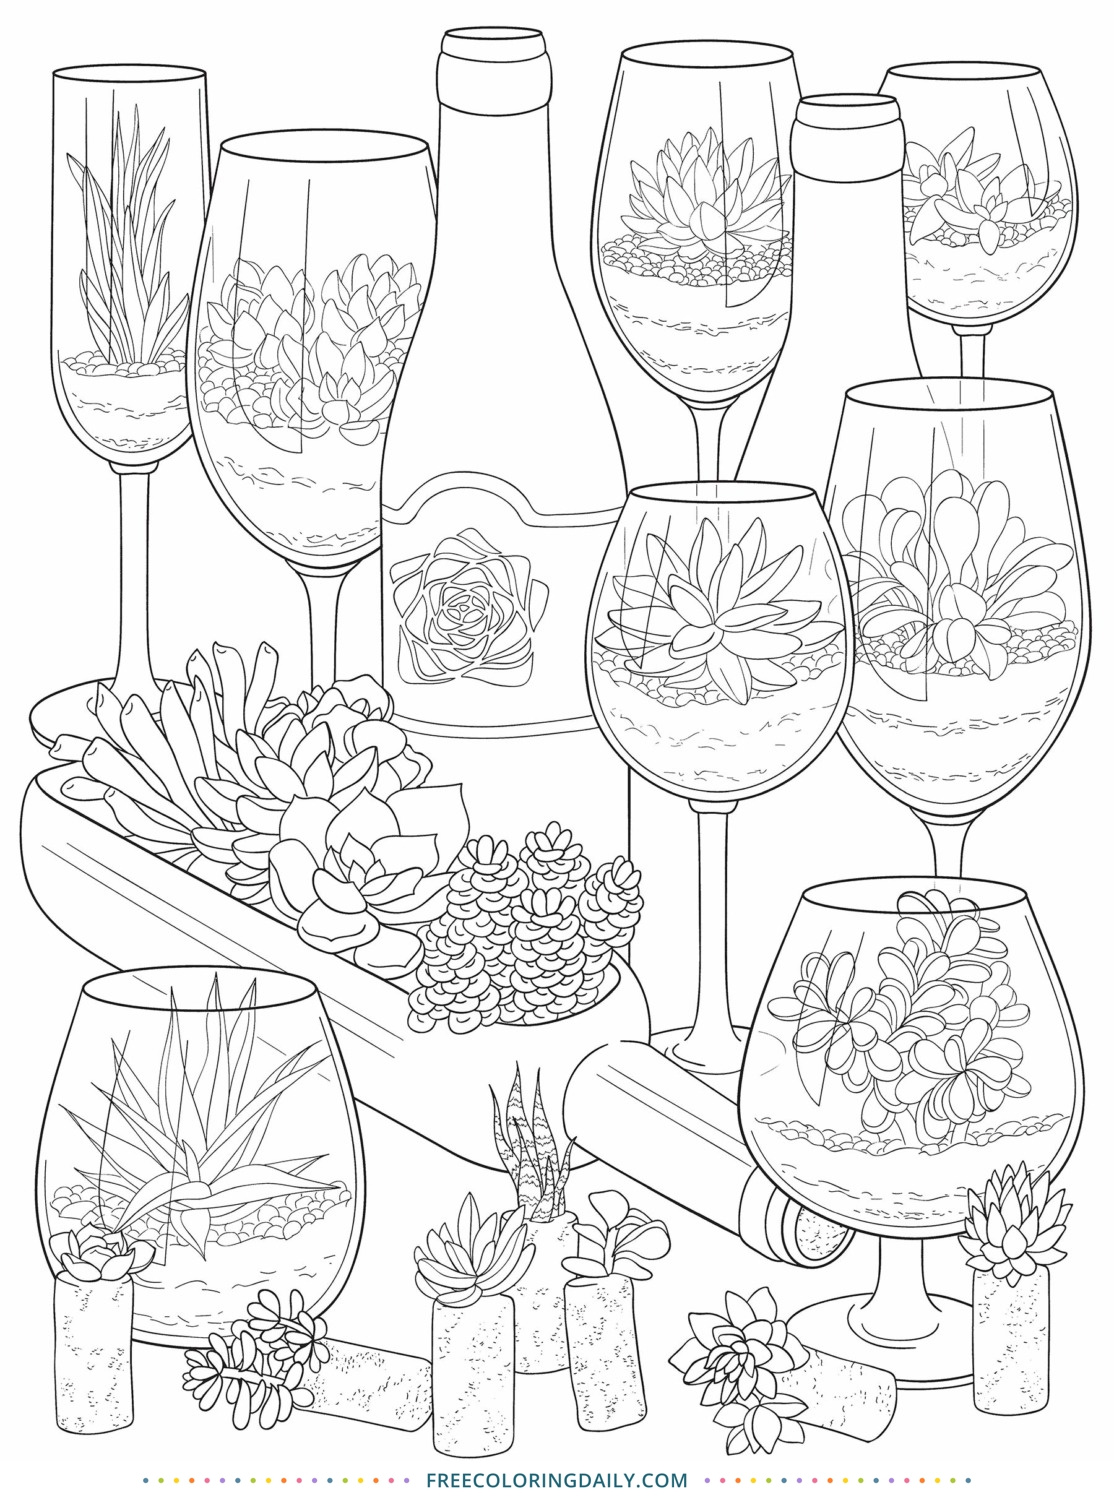 Free Succulents Coloring Page | Free Coloring Daily